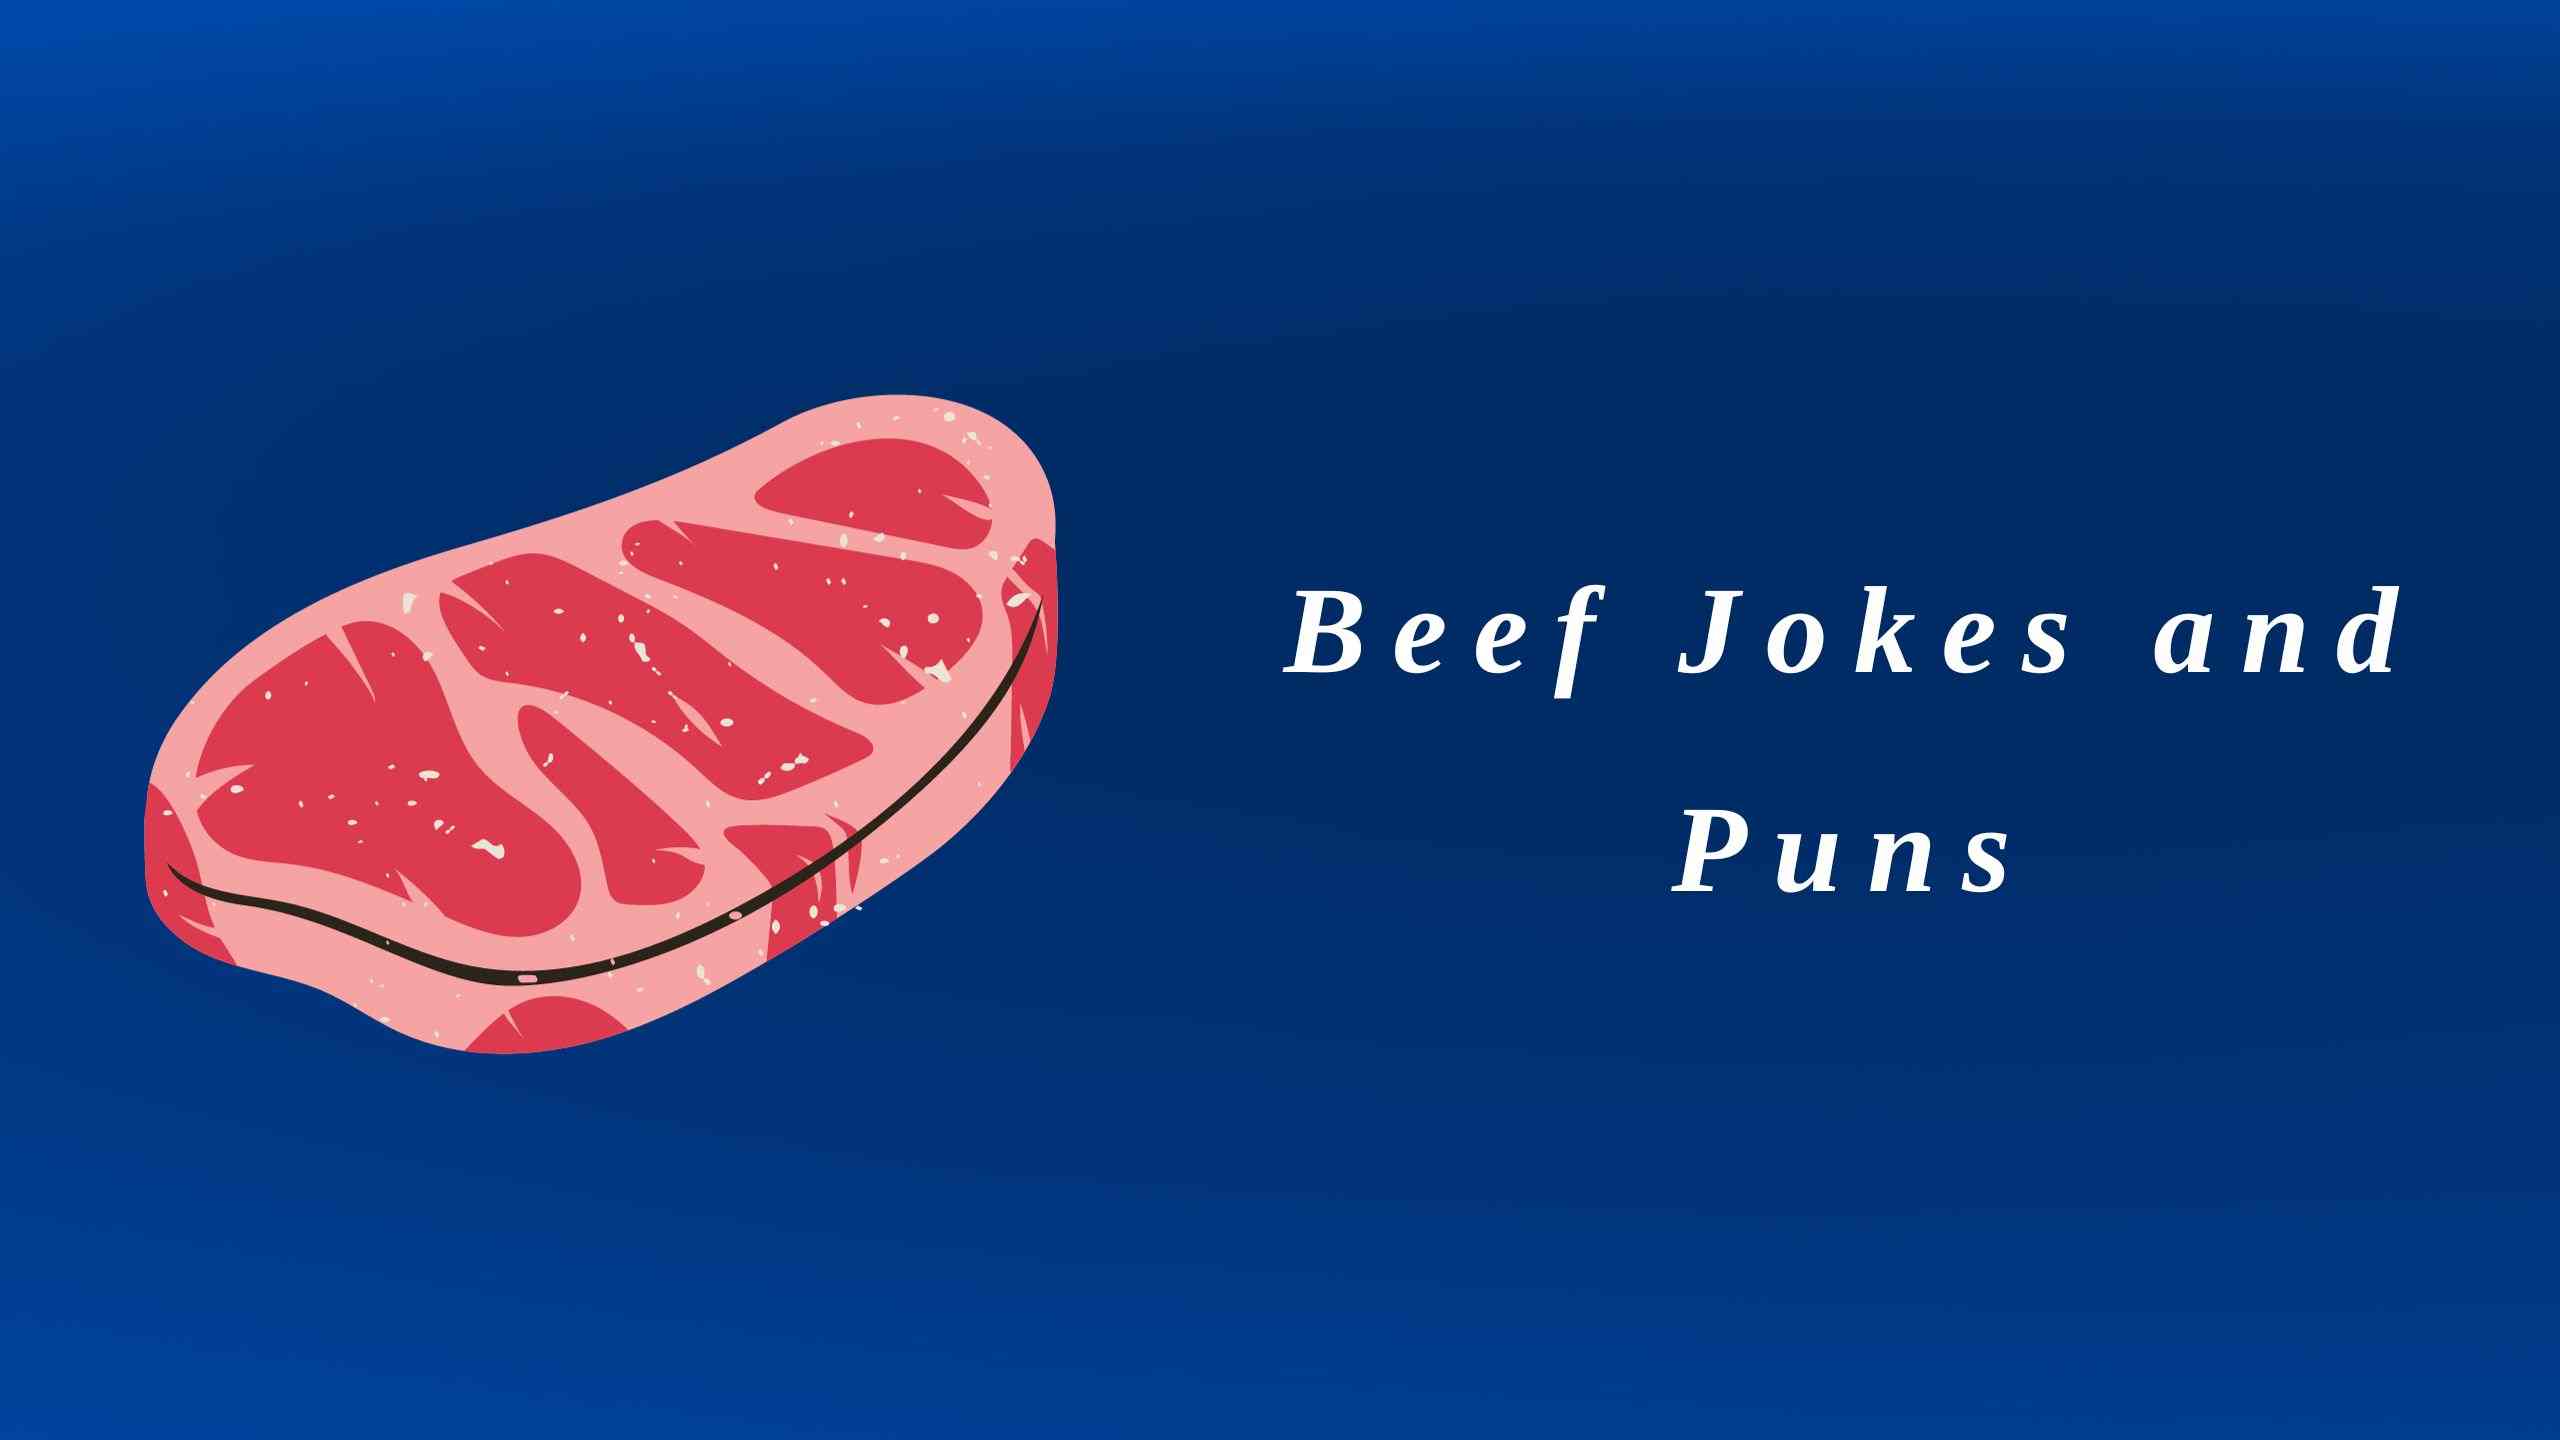 Beef Jokes and Puns